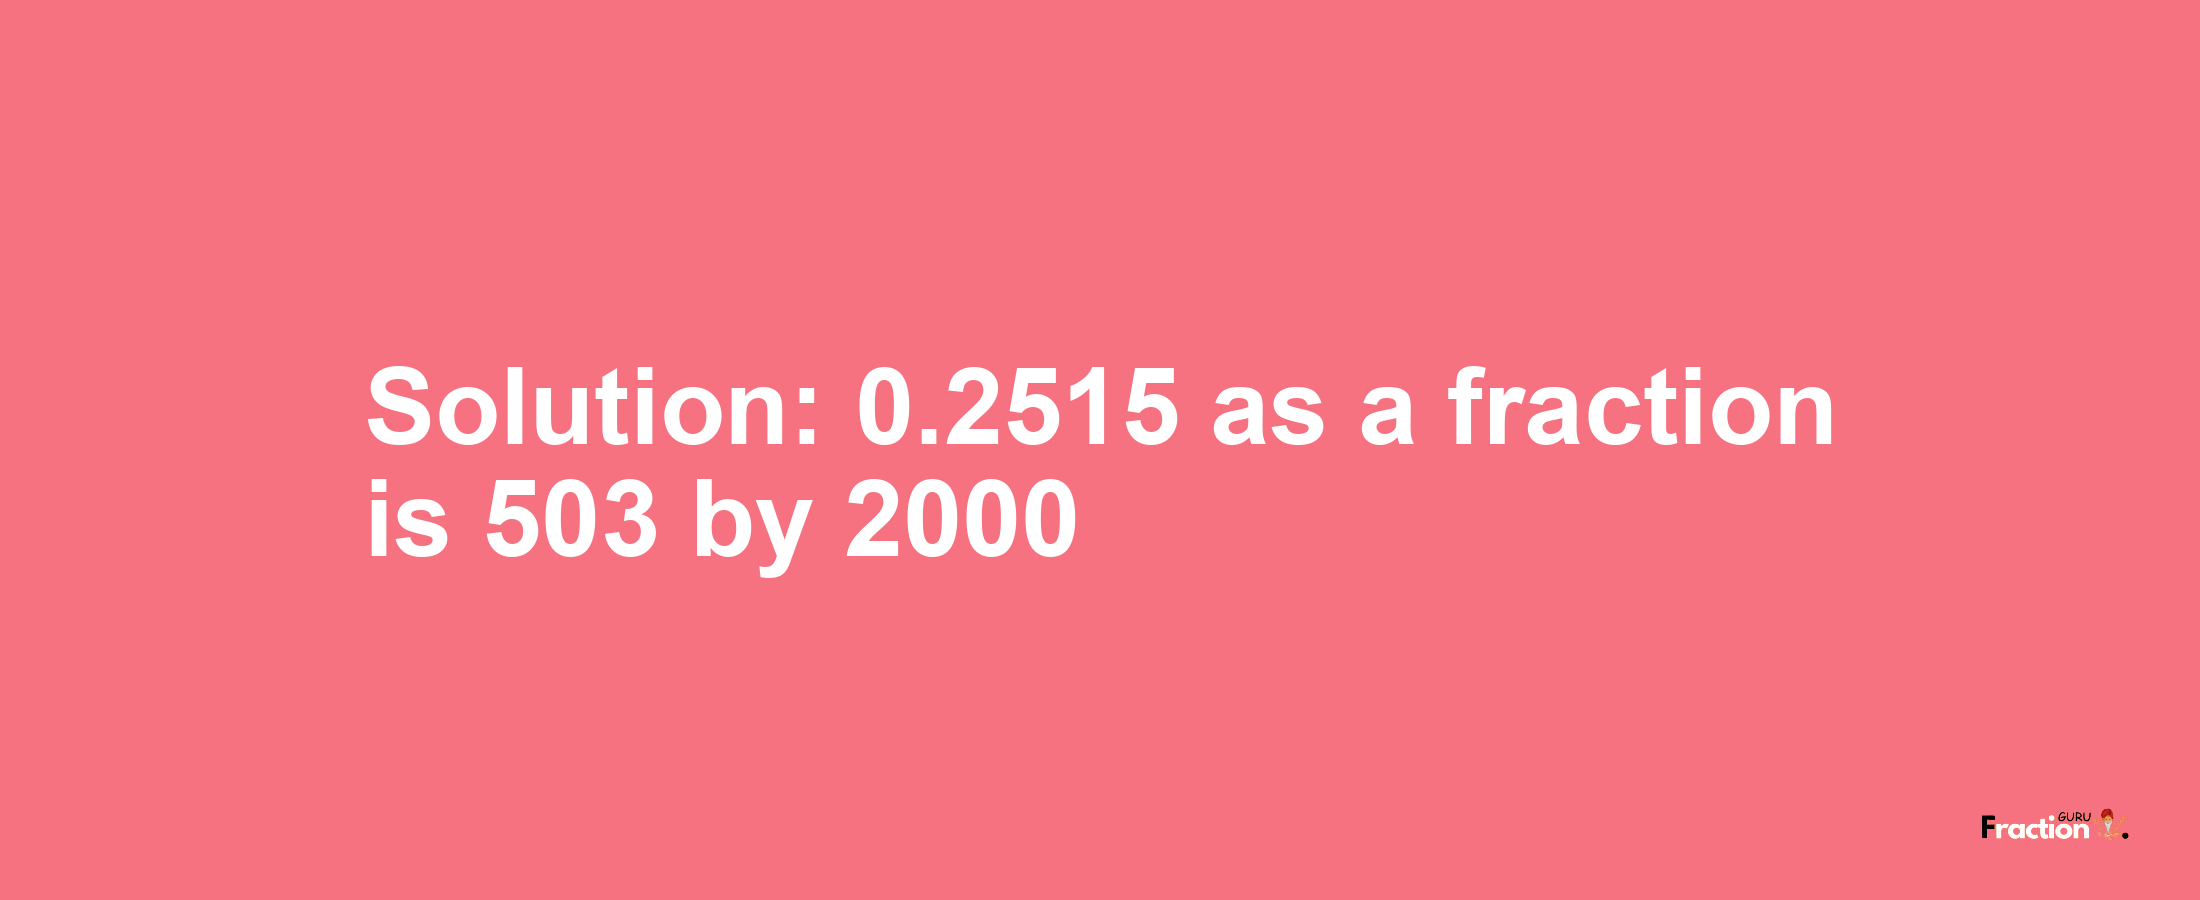 Solution:0.2515 as a fraction is 503/2000